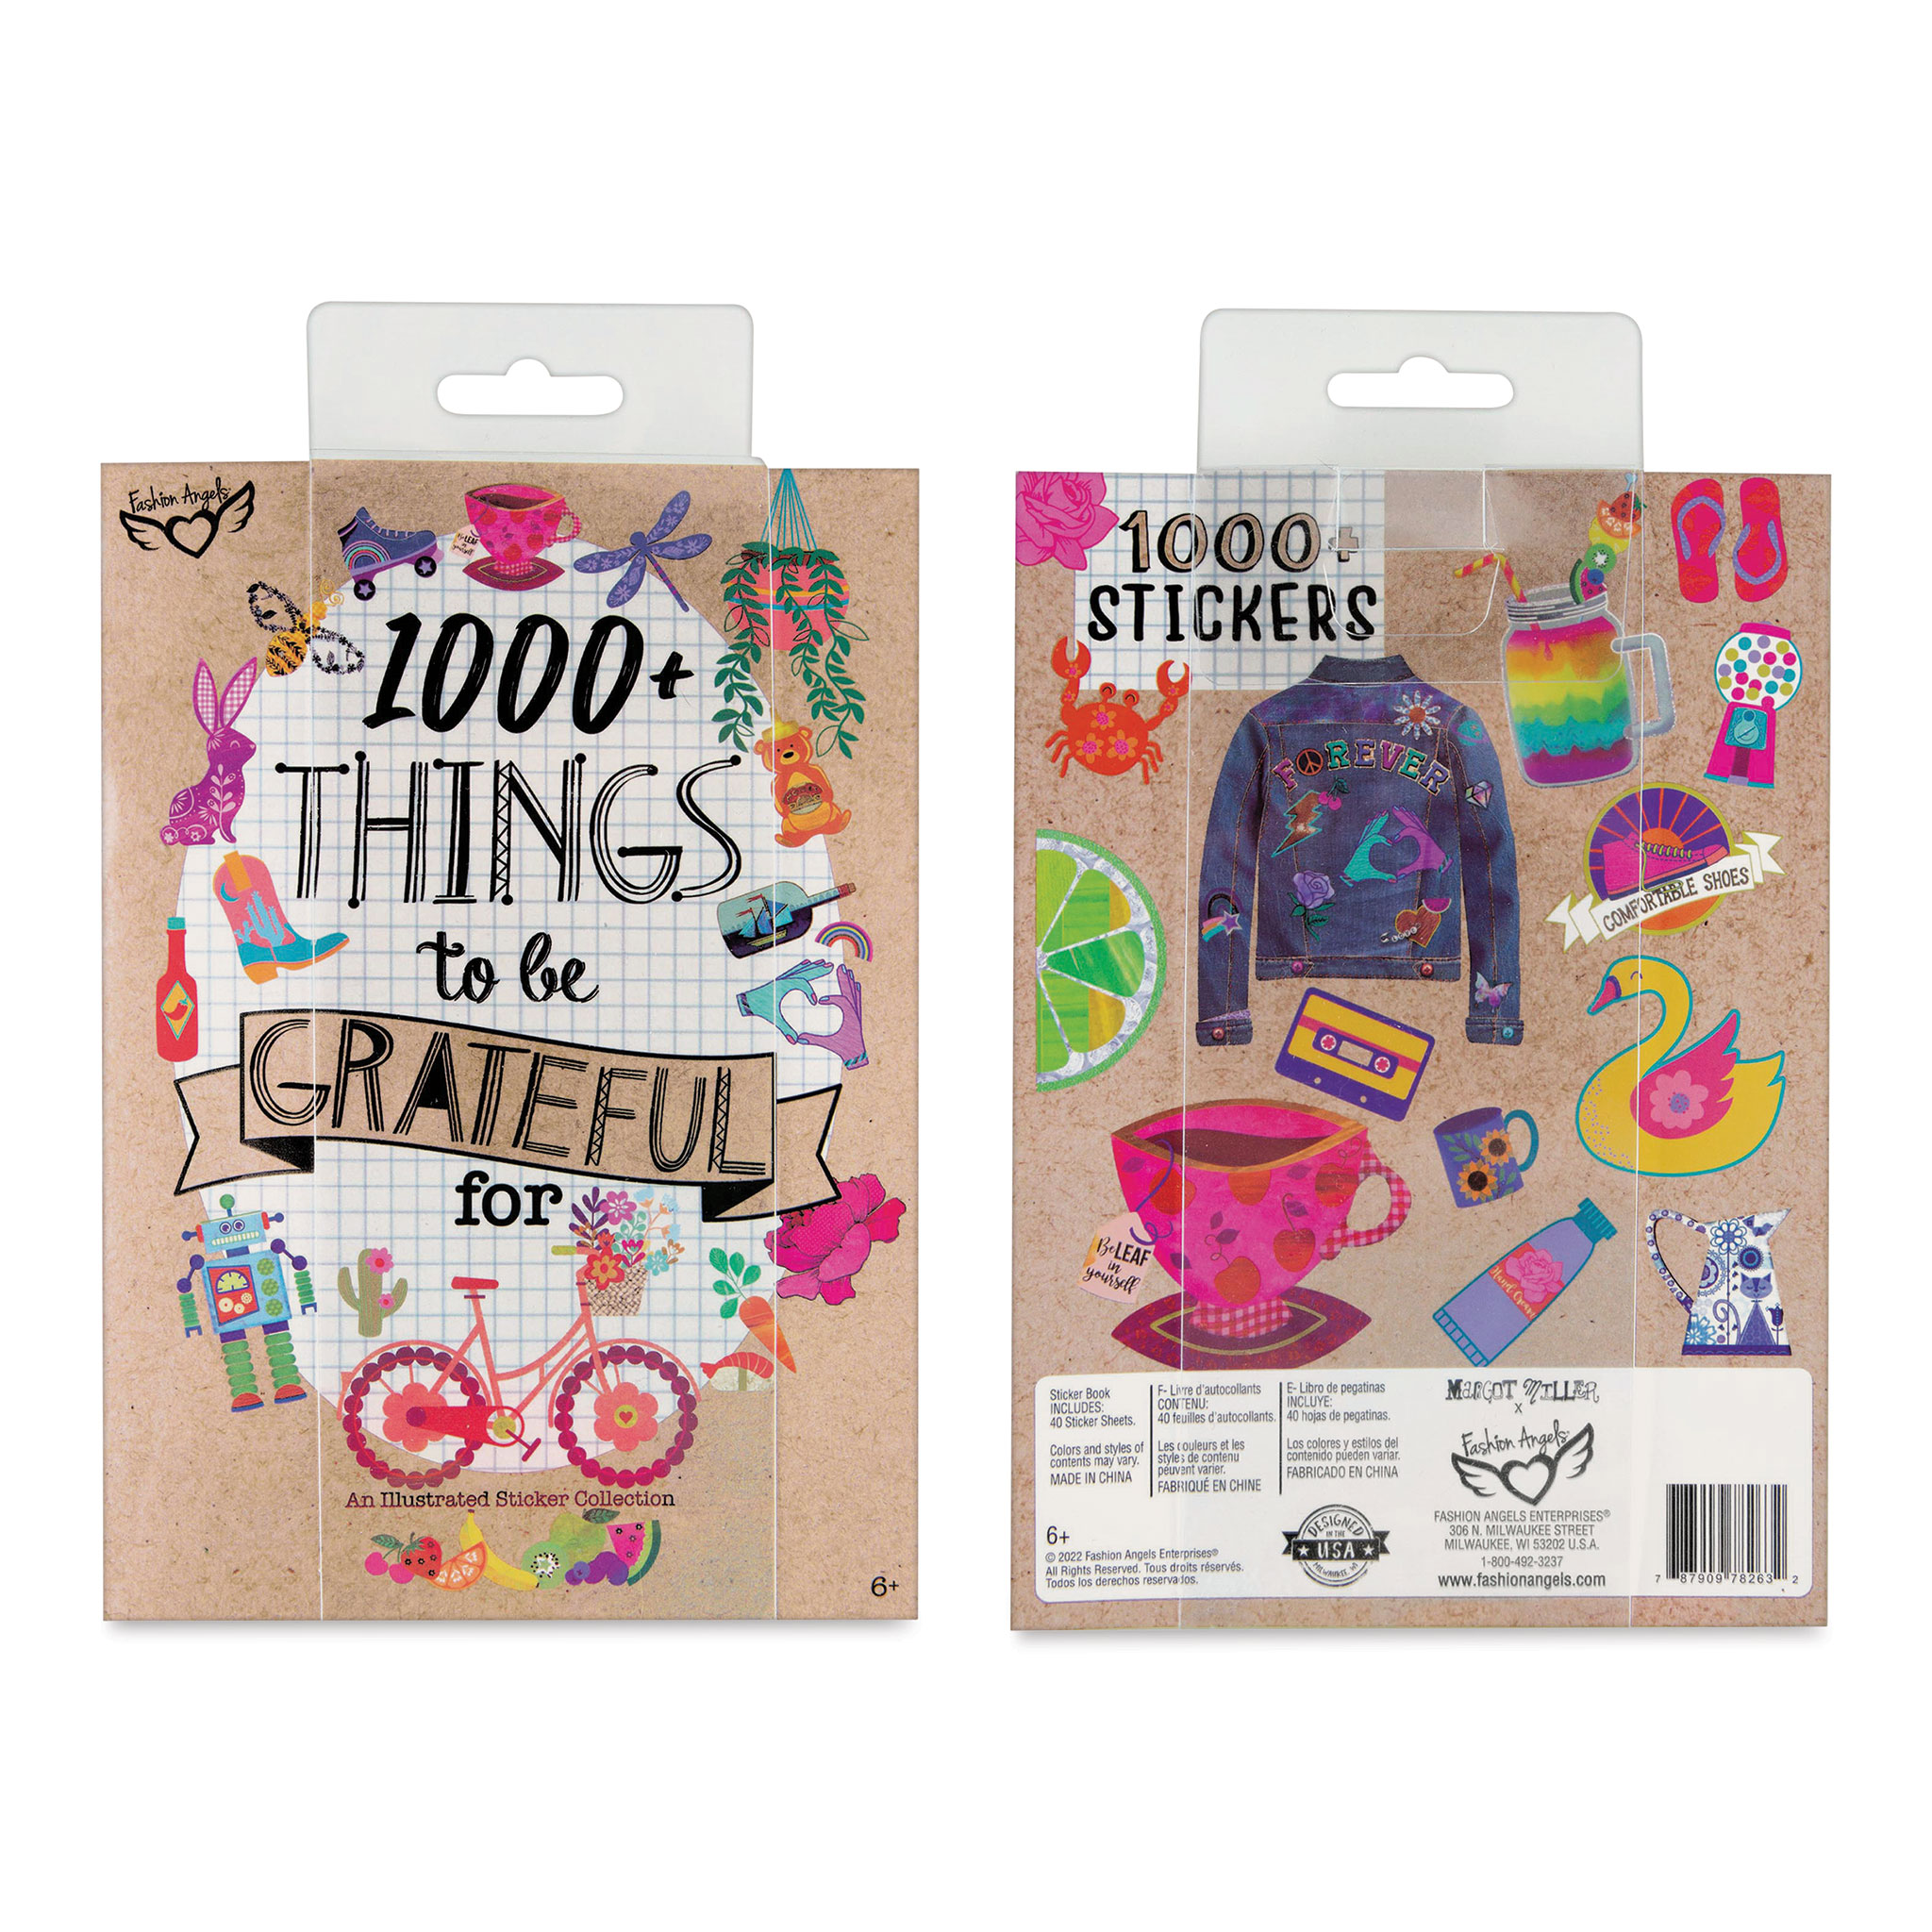 1000+ Things to be Grateful for Sticker Collection, 78263 F